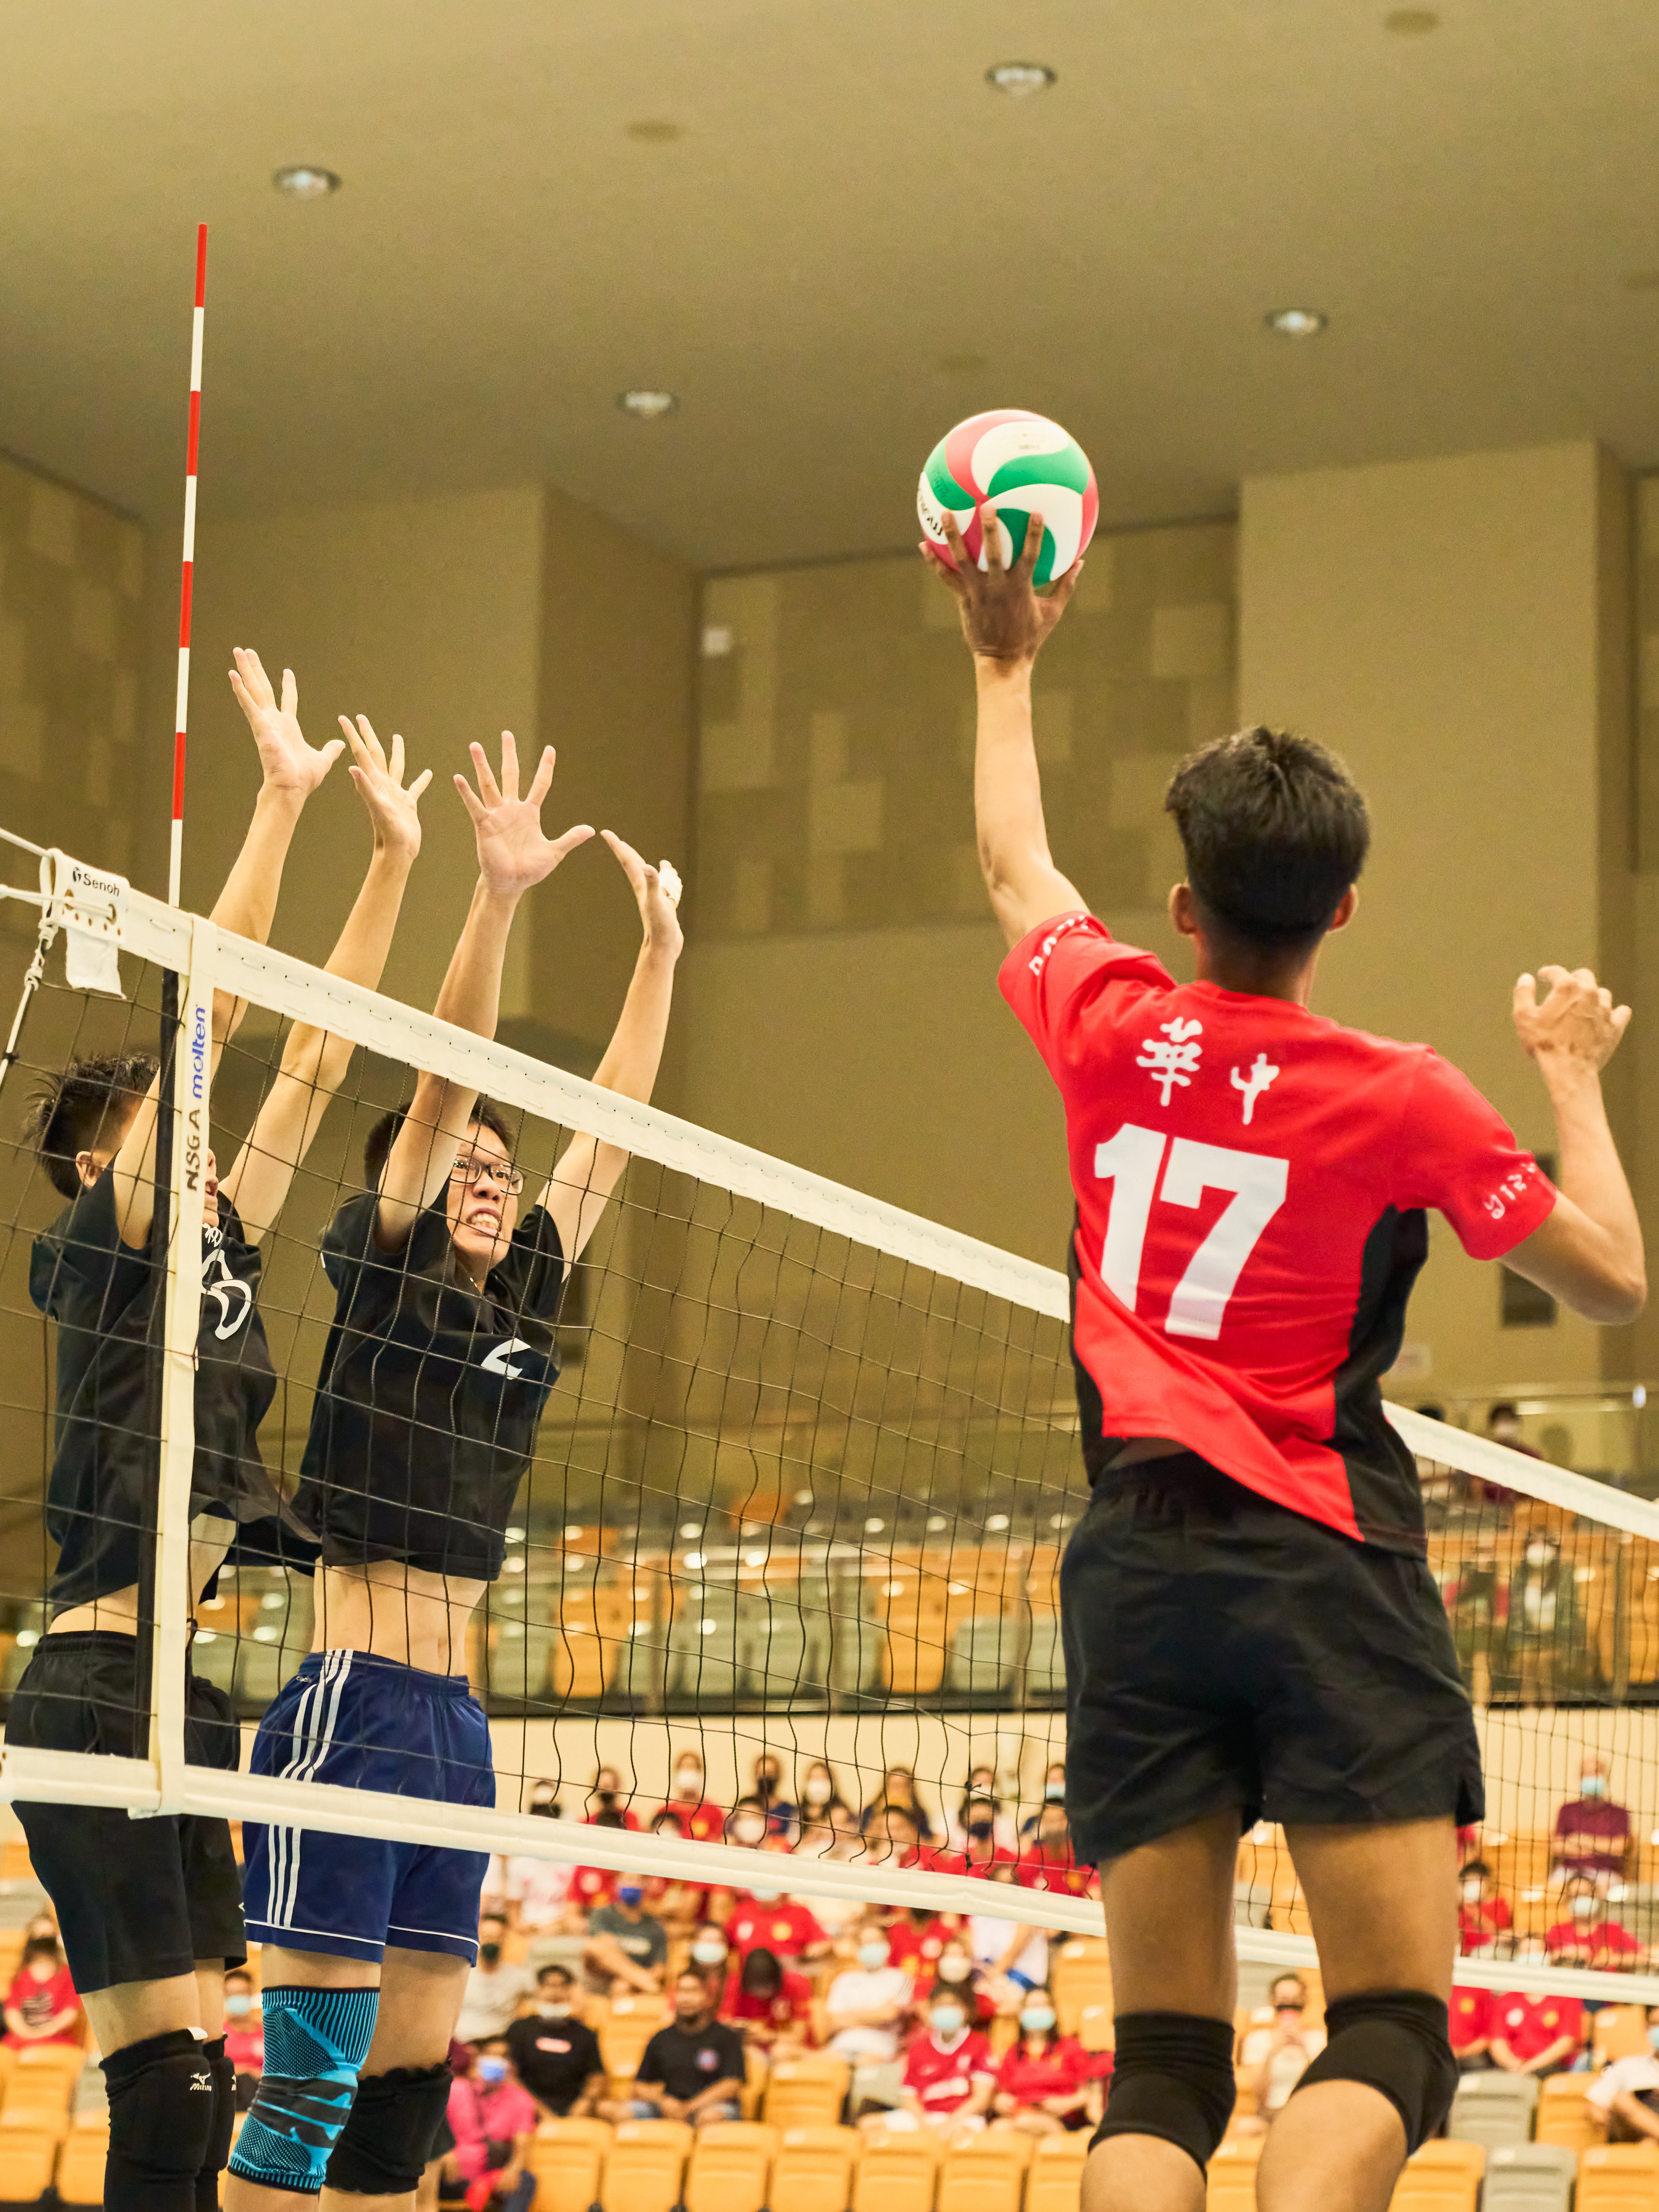 2022-05-23 04 Volleyball Final A Div Boys NYJC vs HCI, Muhammad A A Bin Shaugi(HCI 17) tips the ball over NYJC players Photo by Eric Koh DSC05868